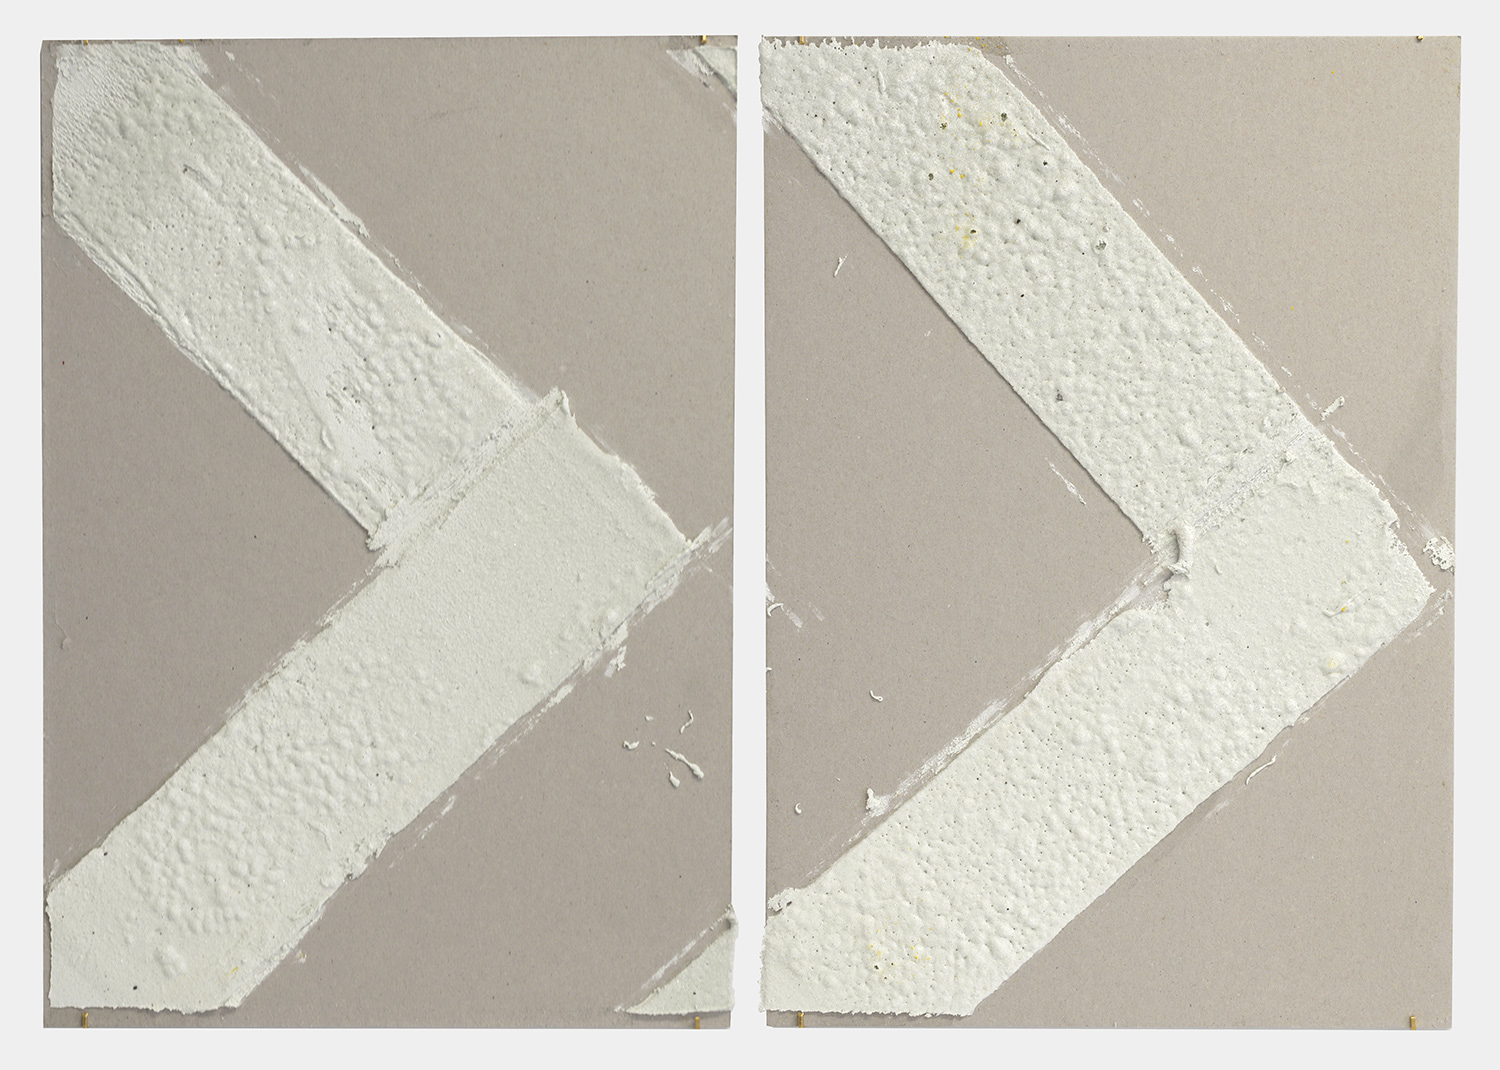   4in (section) (W), 2.27mm (T), White, Chevron, Manual marking, Delancey St, Lewis St int,  2018  Thermoplastic paint, reflective glass particles on grey board  Diptych: 50 x 35 cm each 